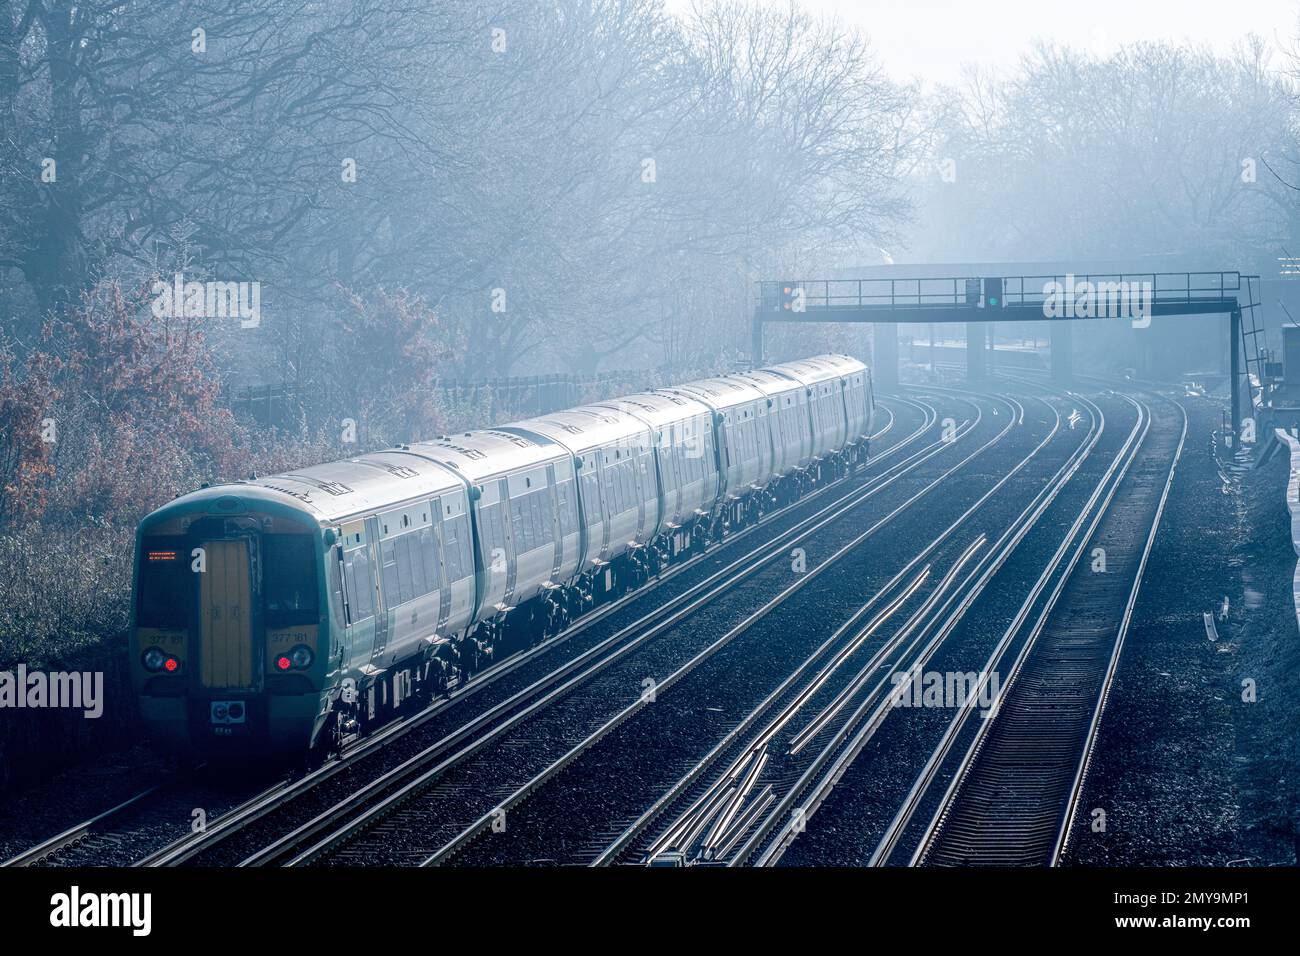 A foggy, frosty day and a train heads to Victoria station in London, England Stock Photo